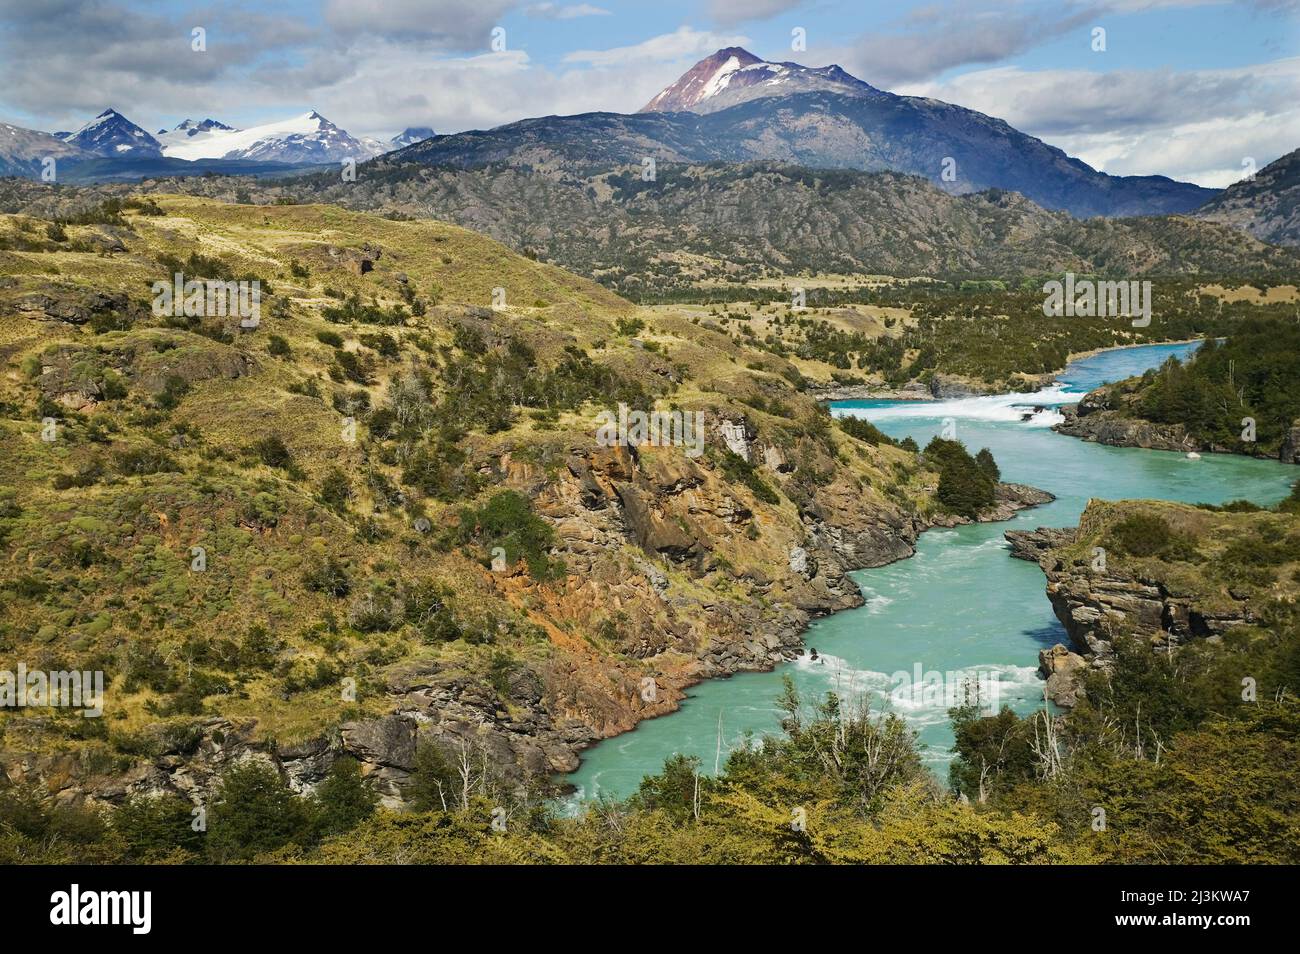 The Rio Baker flowing through a rugged Patagonian landscape, Chile ...